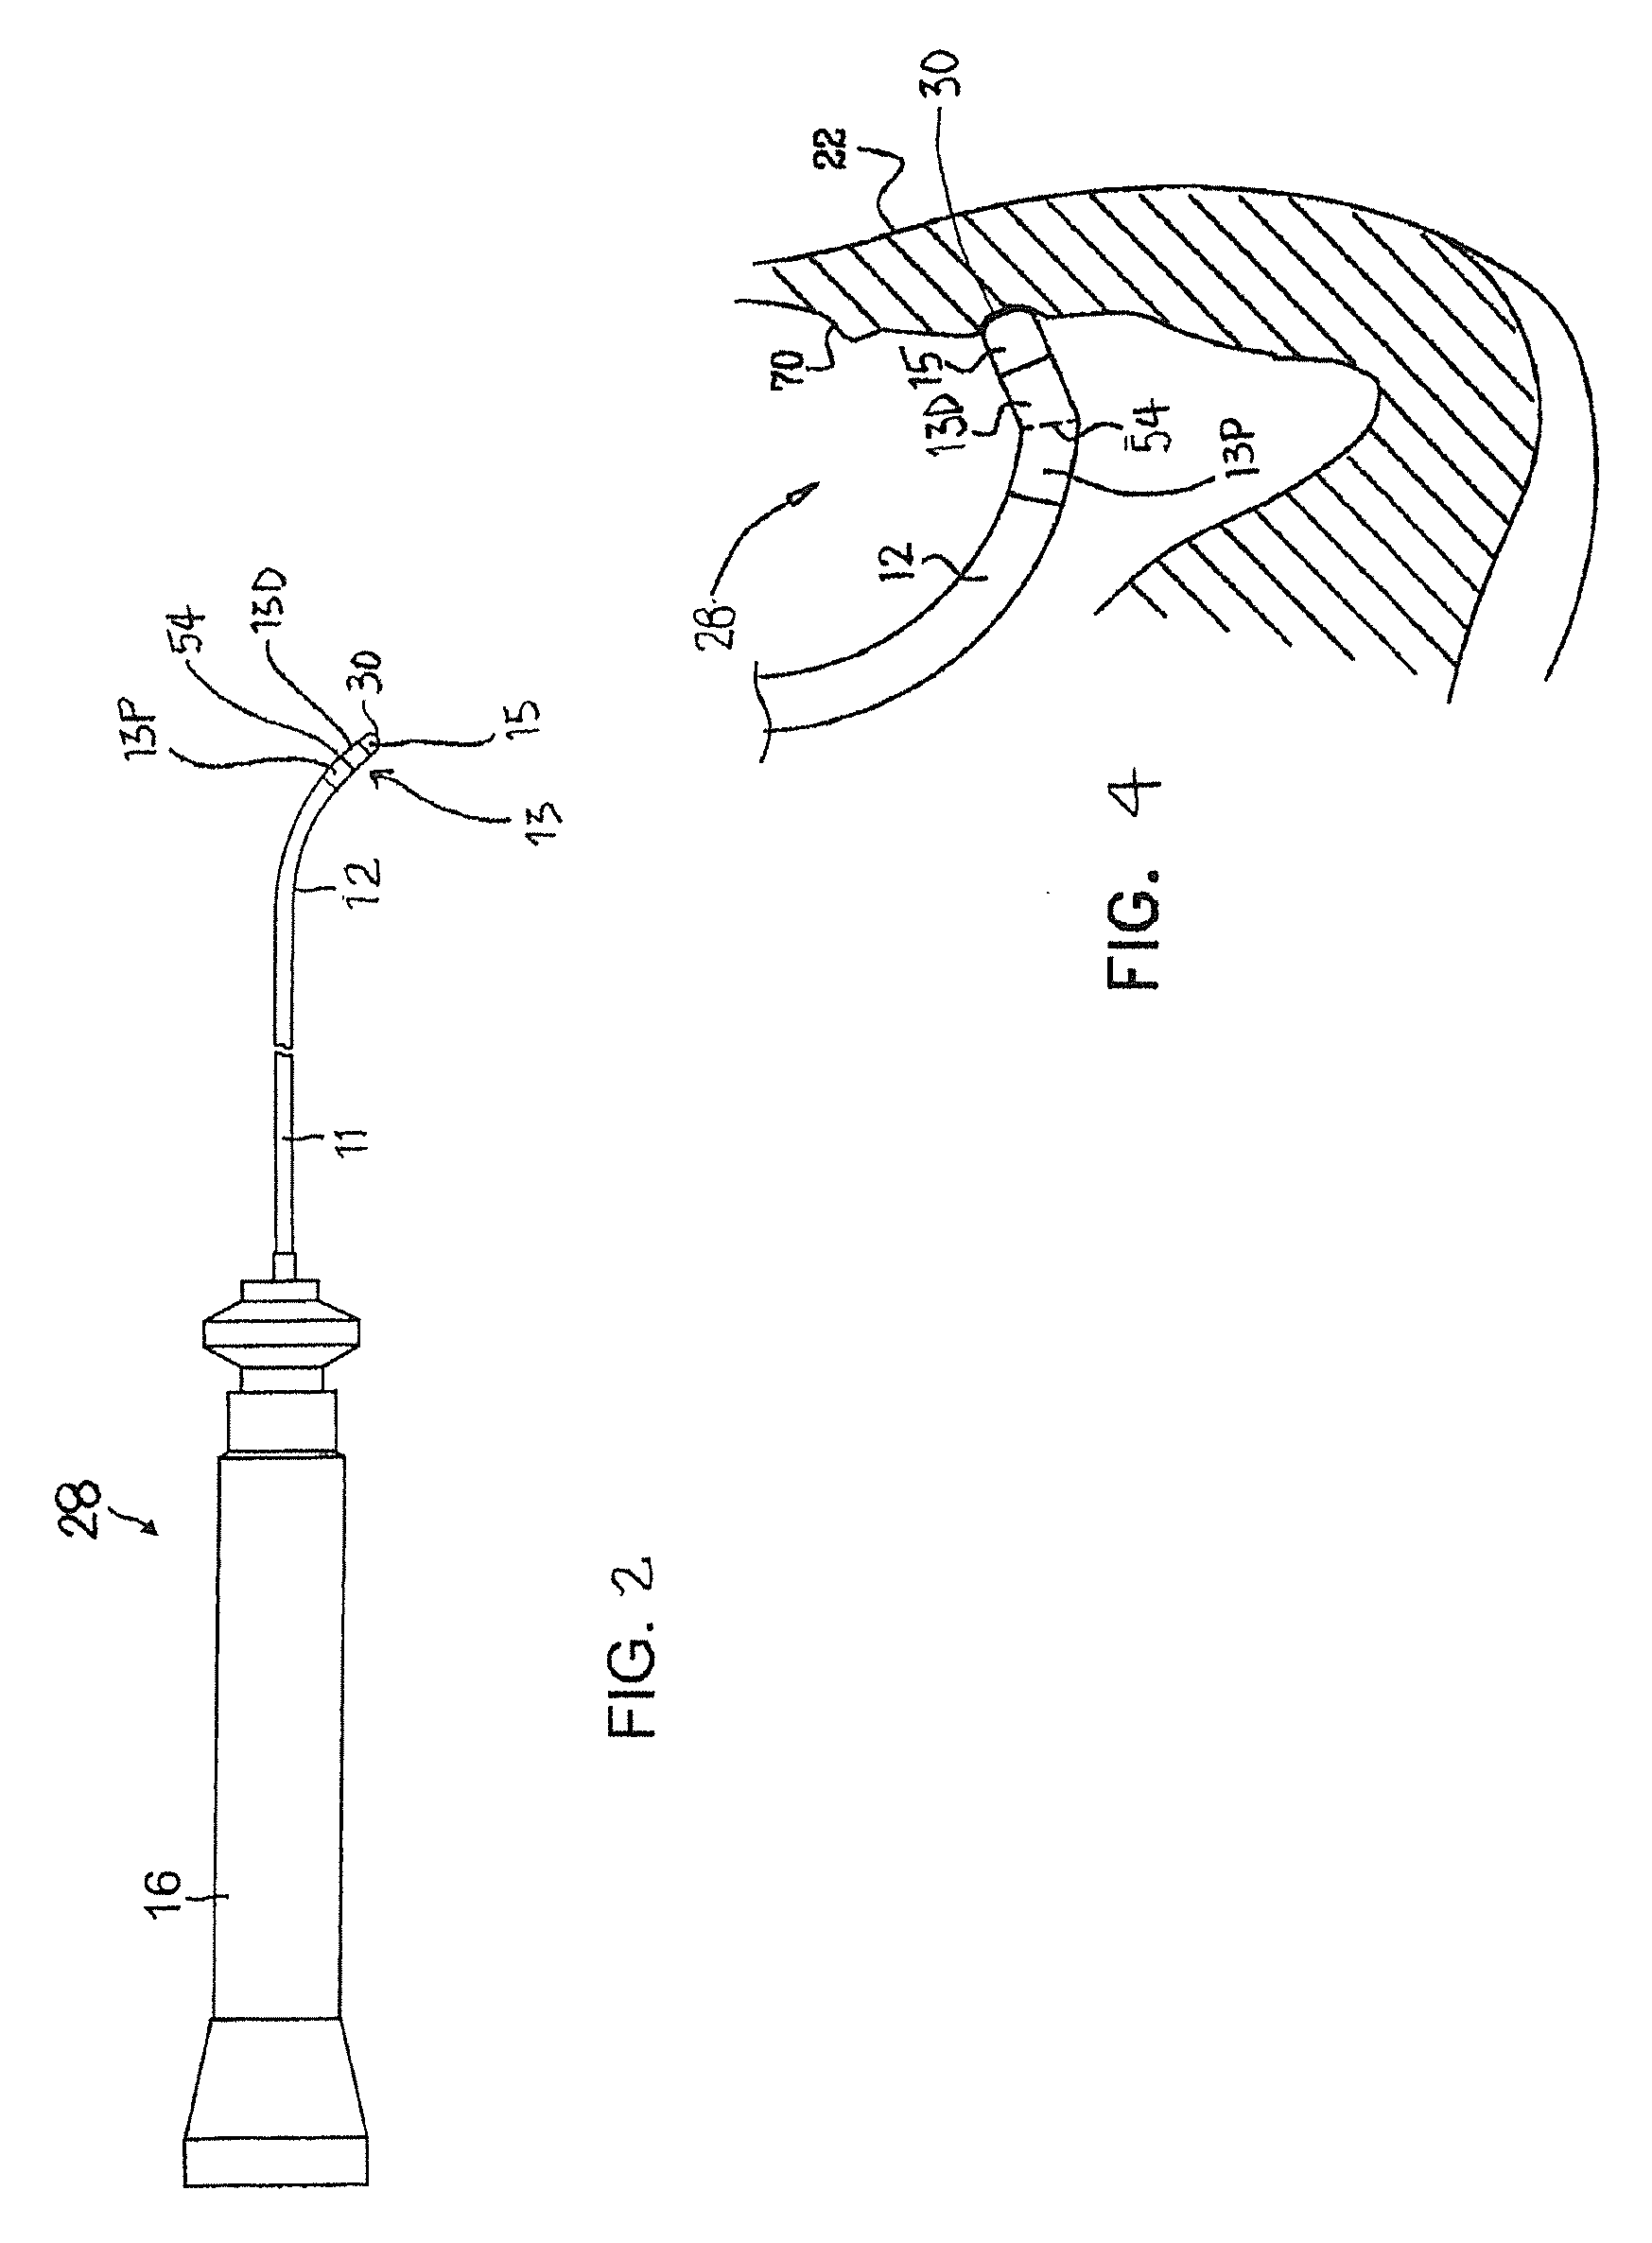 Catheter with serially connected sensing structures and methods of calibration and detection